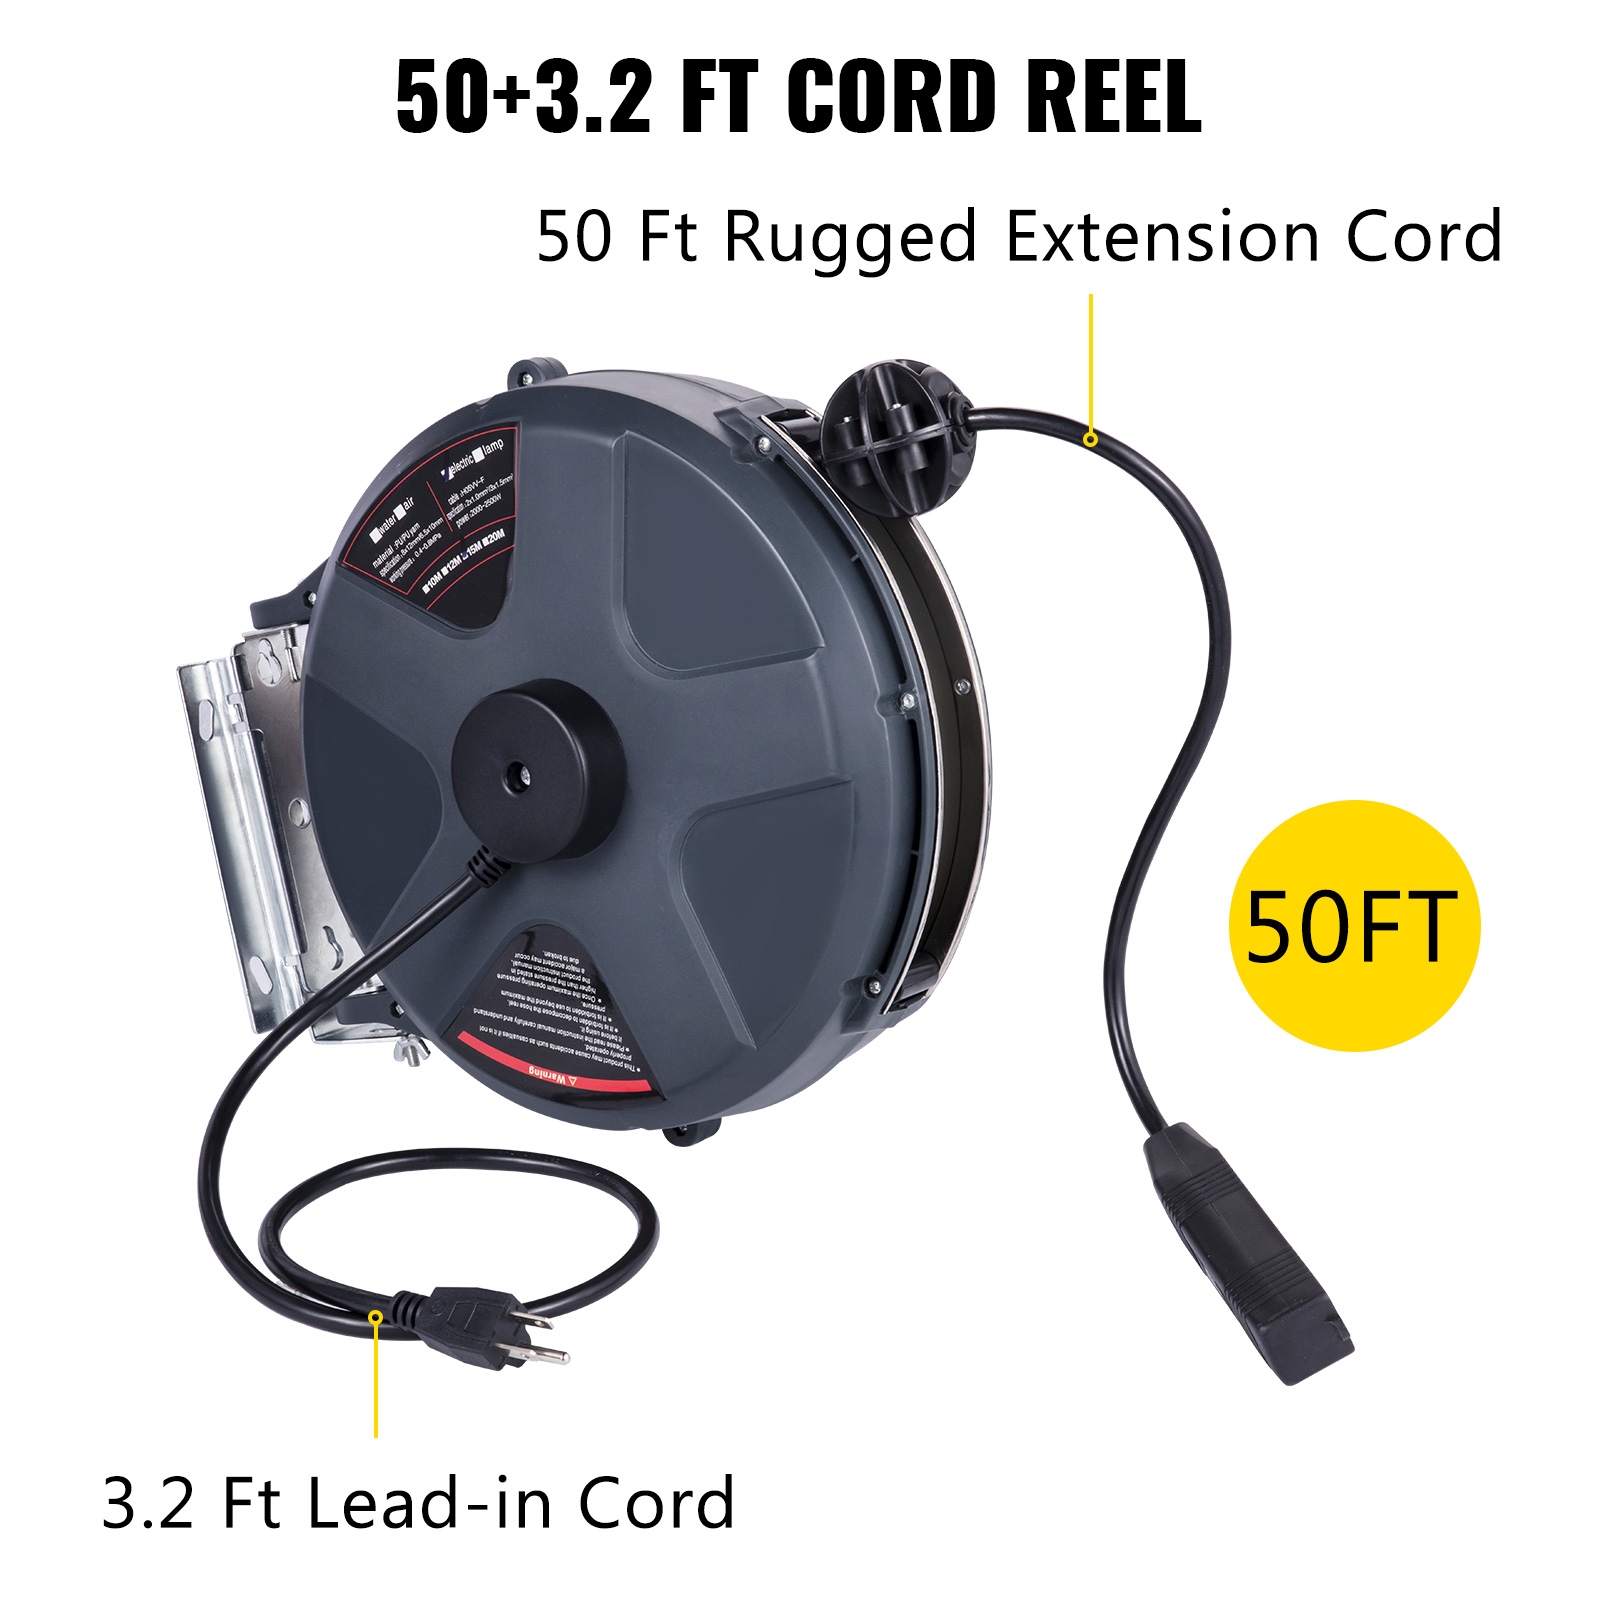 VEVOR Retractable Extension Cord Reel 50+3.2FT, 16/3 SJT Power Cord Reel,  Heavy Duty Electric Cord Reel, Wall/Ceiling Mount Retractable Cord Reel,  Automatic Flexible Triple Tap Connector with Stopper